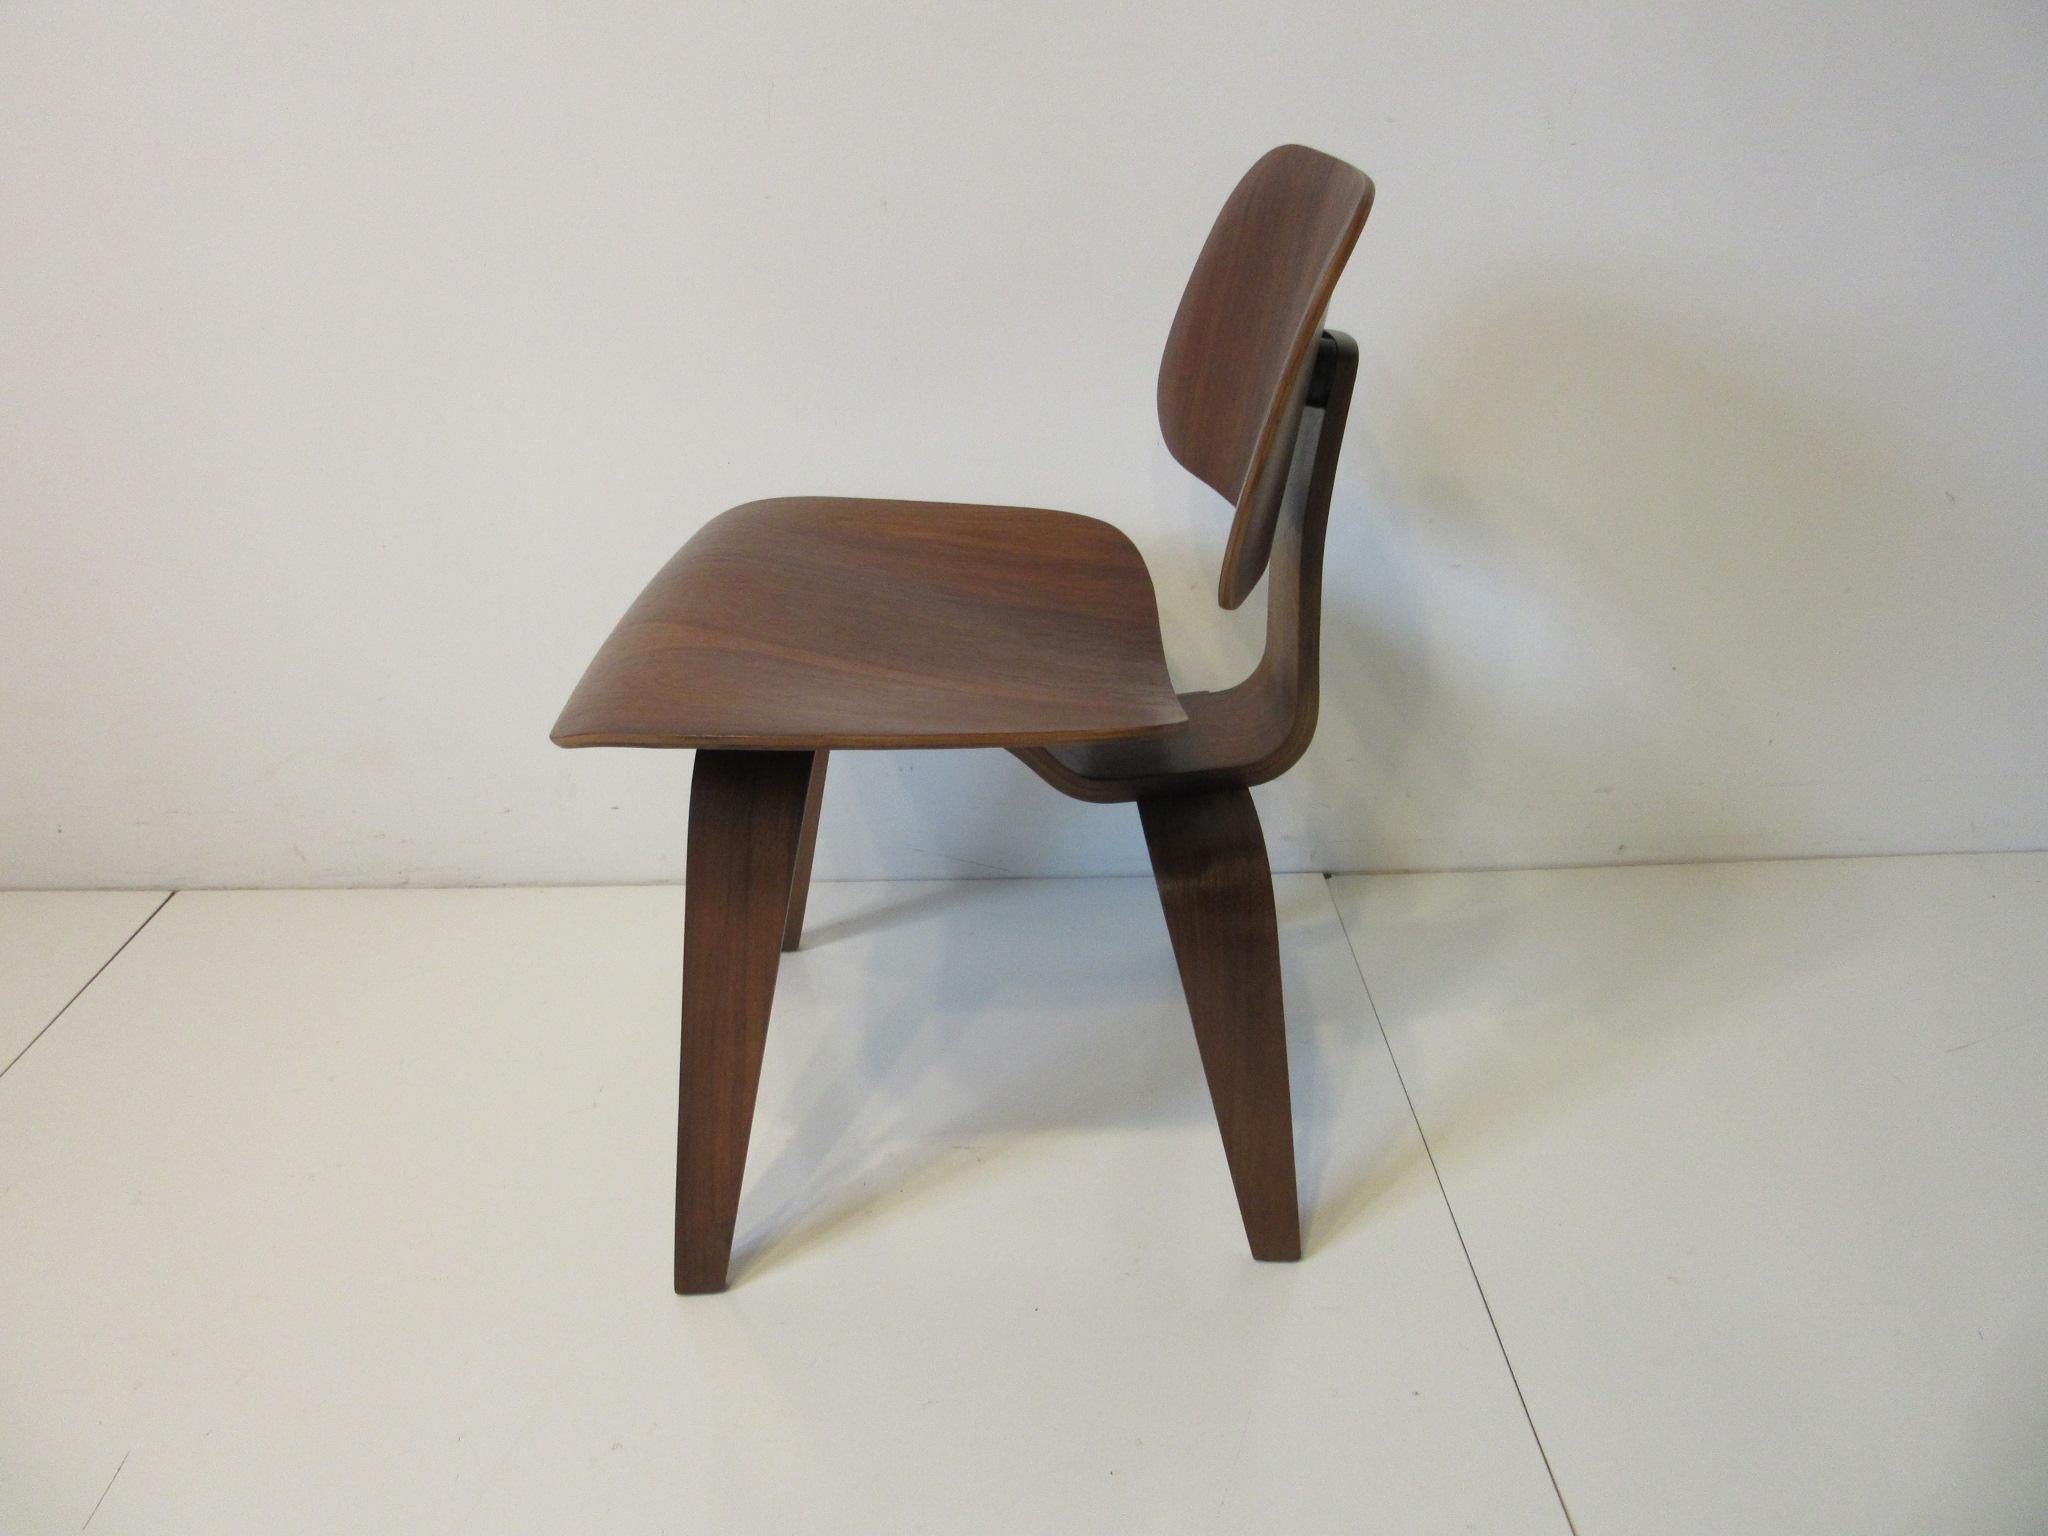 A sculptural DCW with flamed dark walnut graining to the seat and back giving this chair a rich wow factor, this early production chair has the five screw pattern to the bottom. A mid century iconic design from the team of Ray and Charles Eames